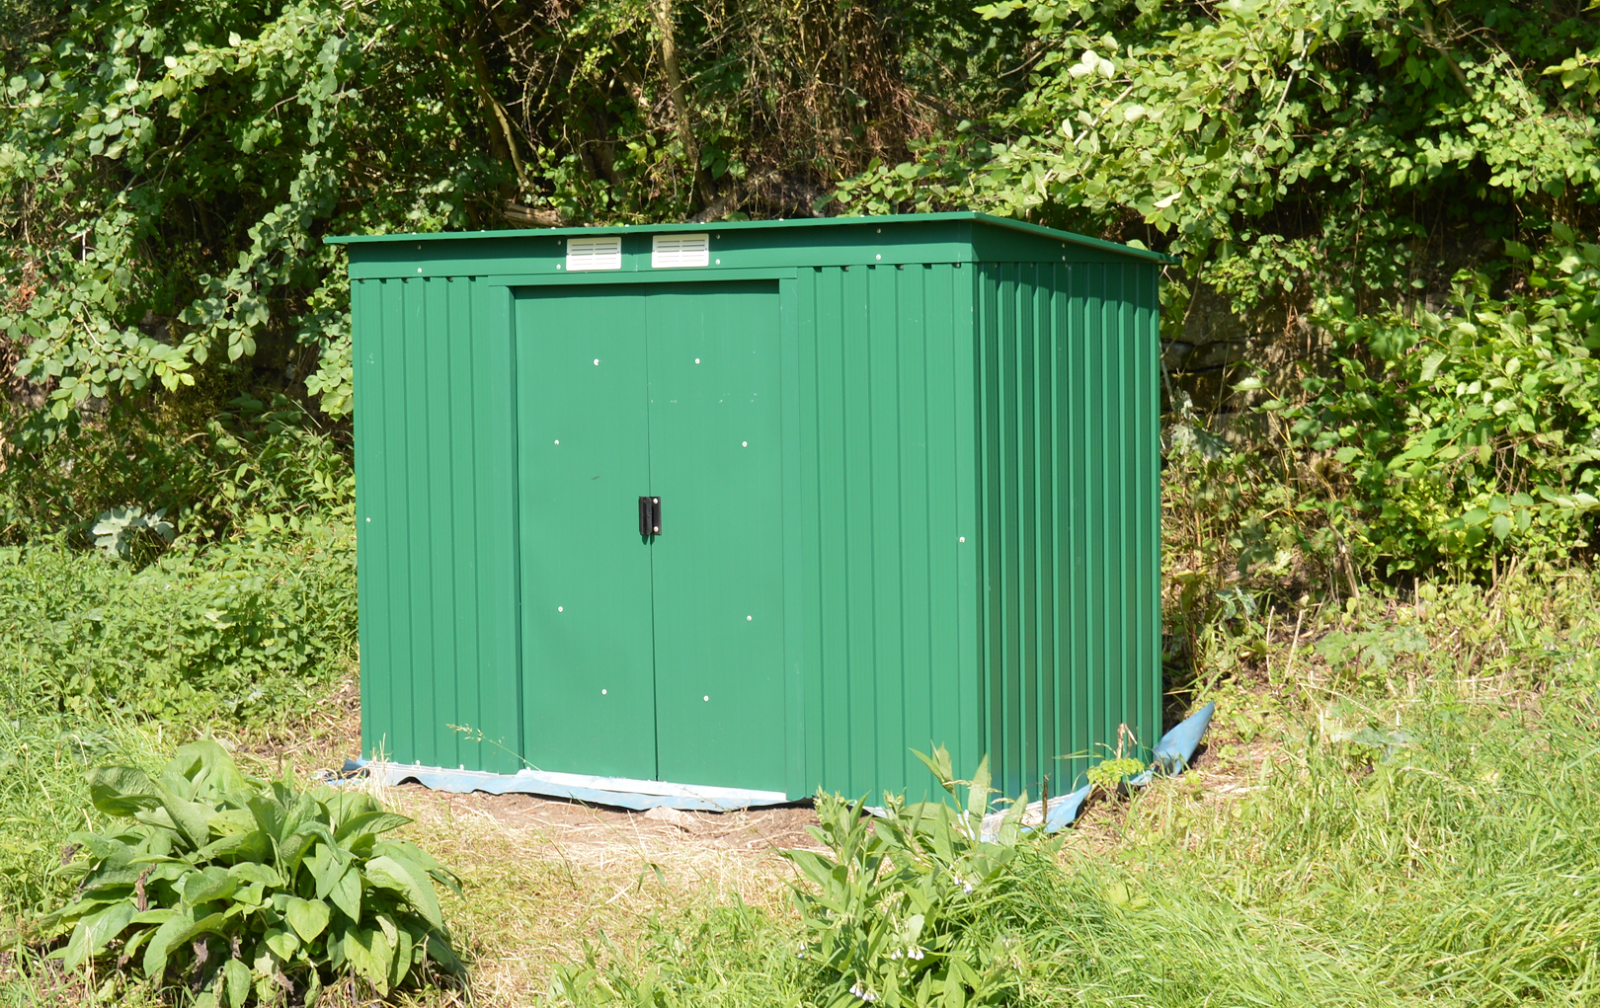 The completed tool shed in Turnditch Orchard